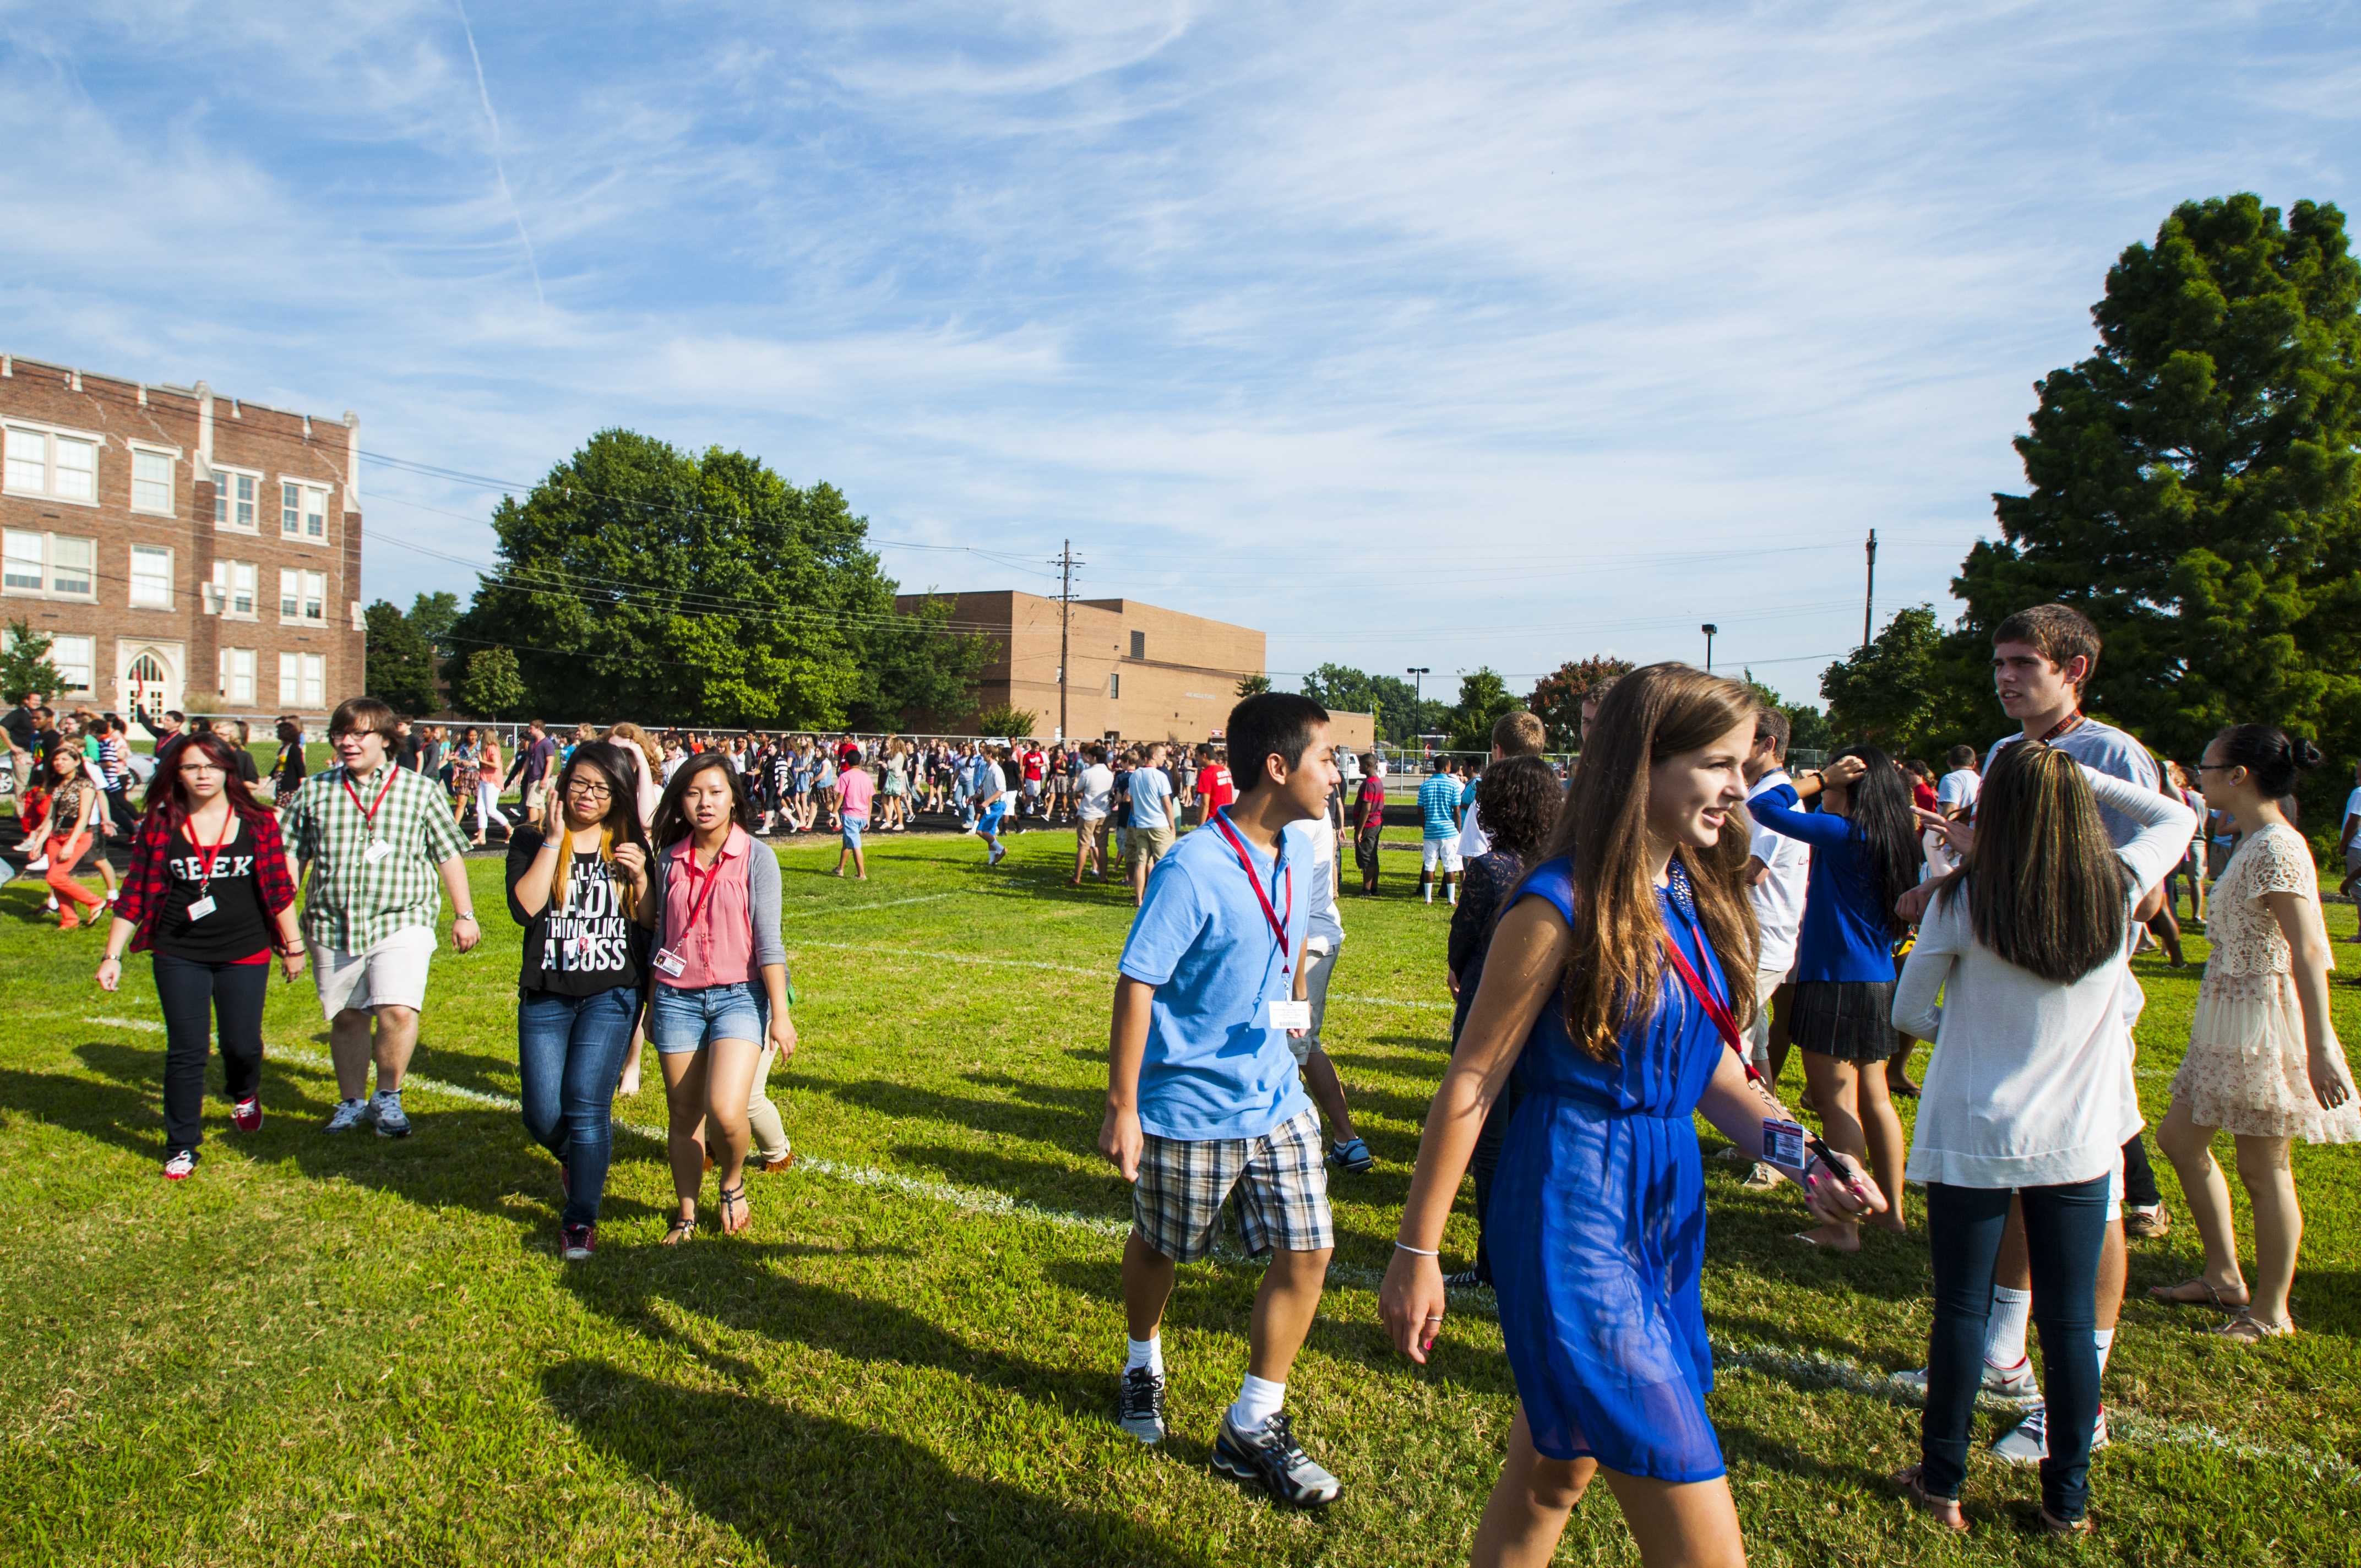 The still blazing, Summer heat beats down on students as they stand in the field. Photo by Jack Steele Mattingly 